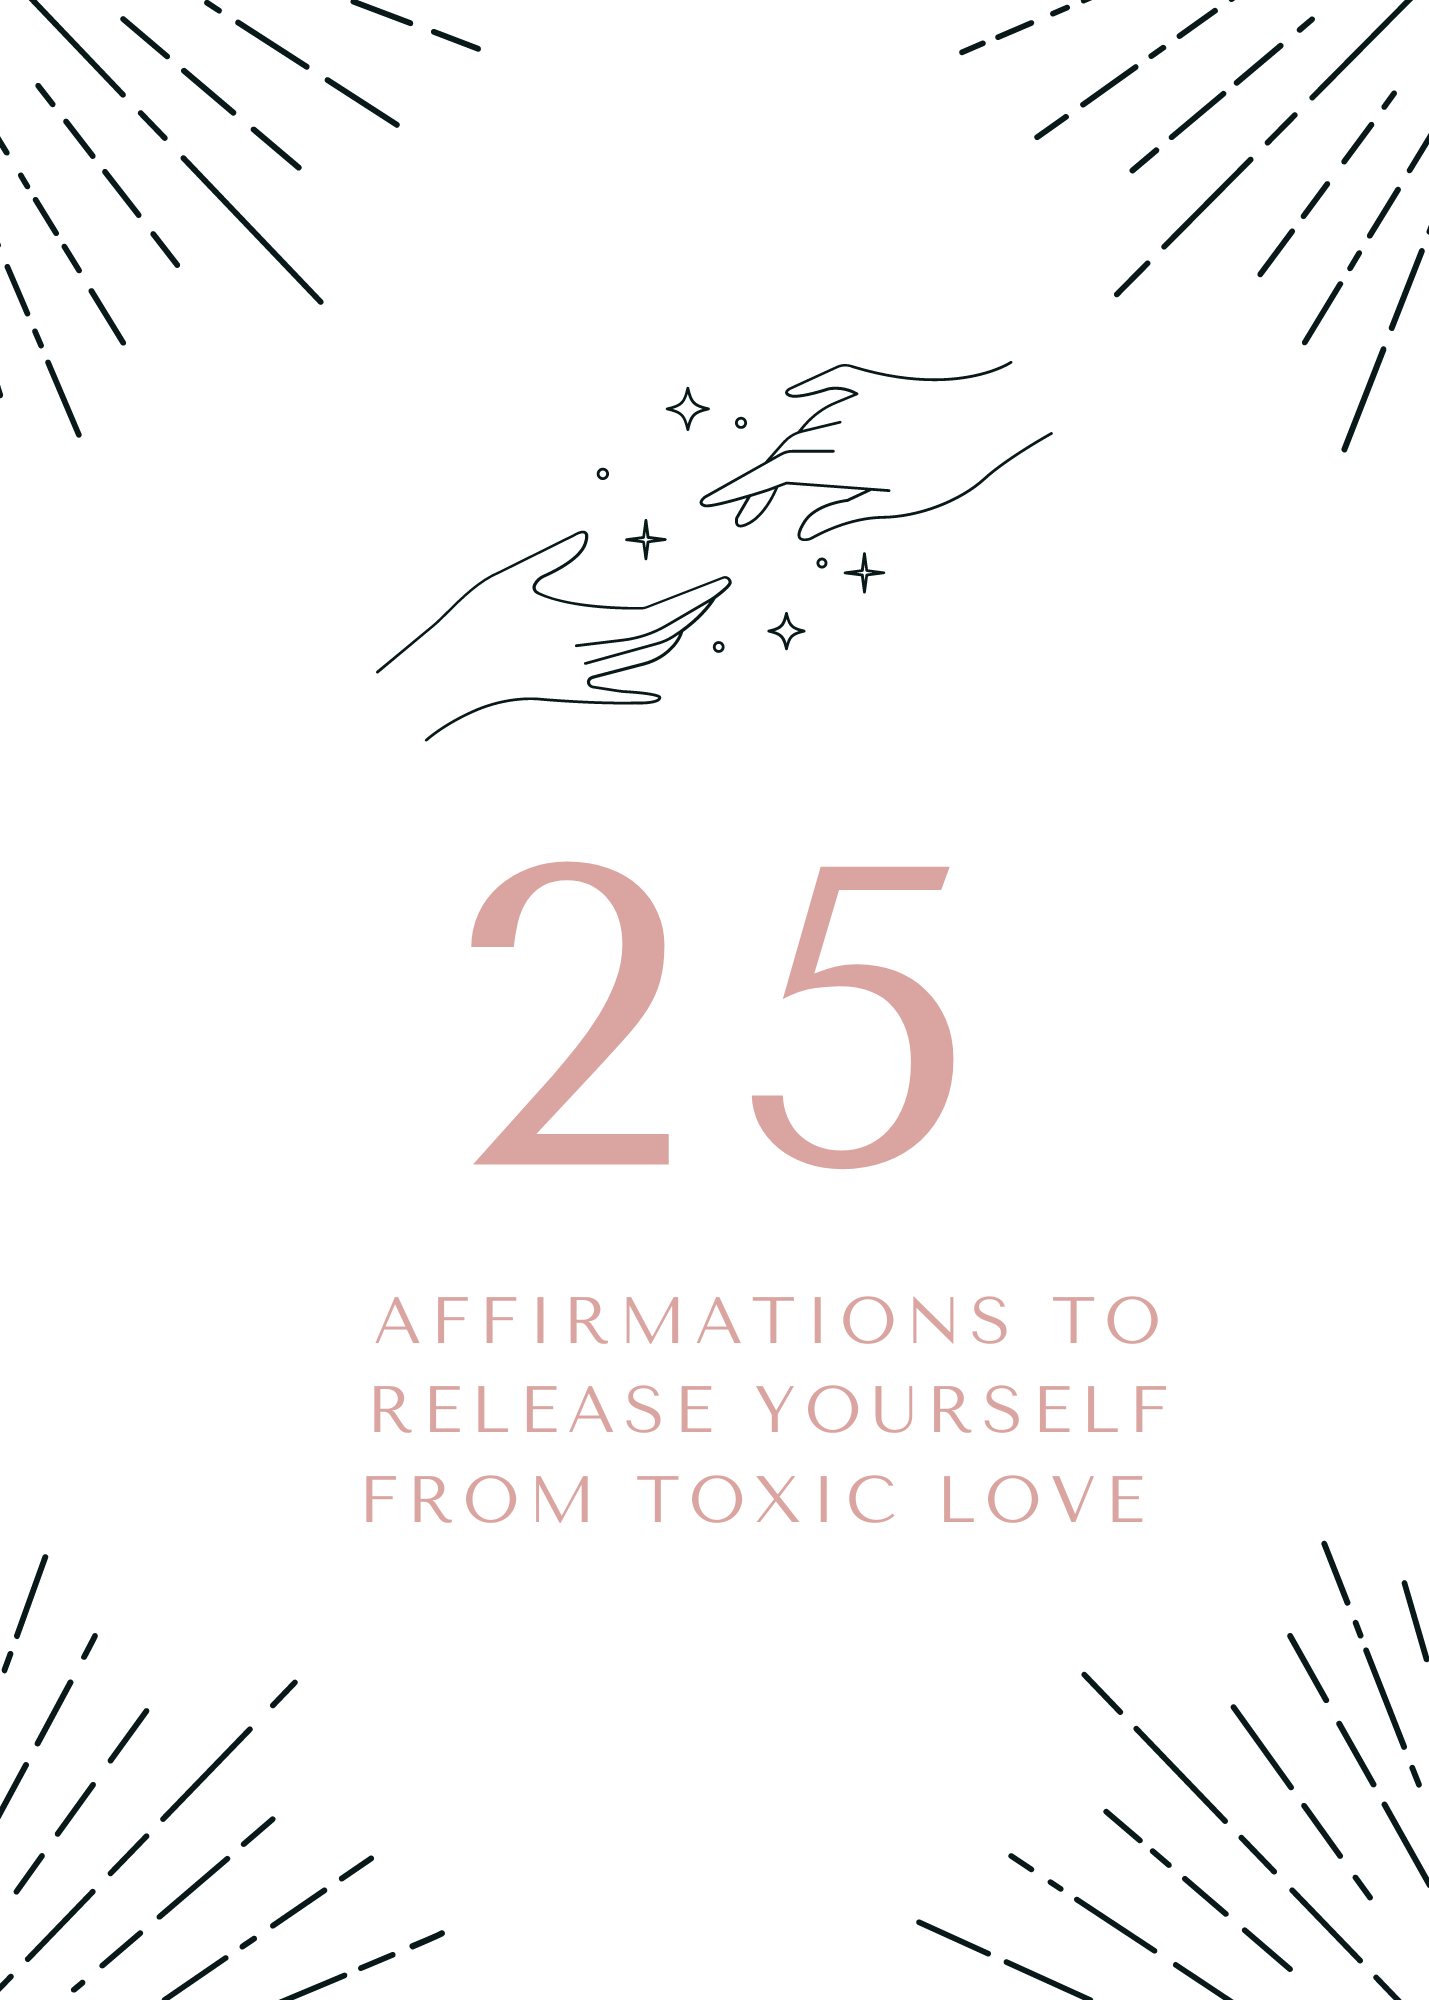 Affirmations to release yourself from Toxic Love